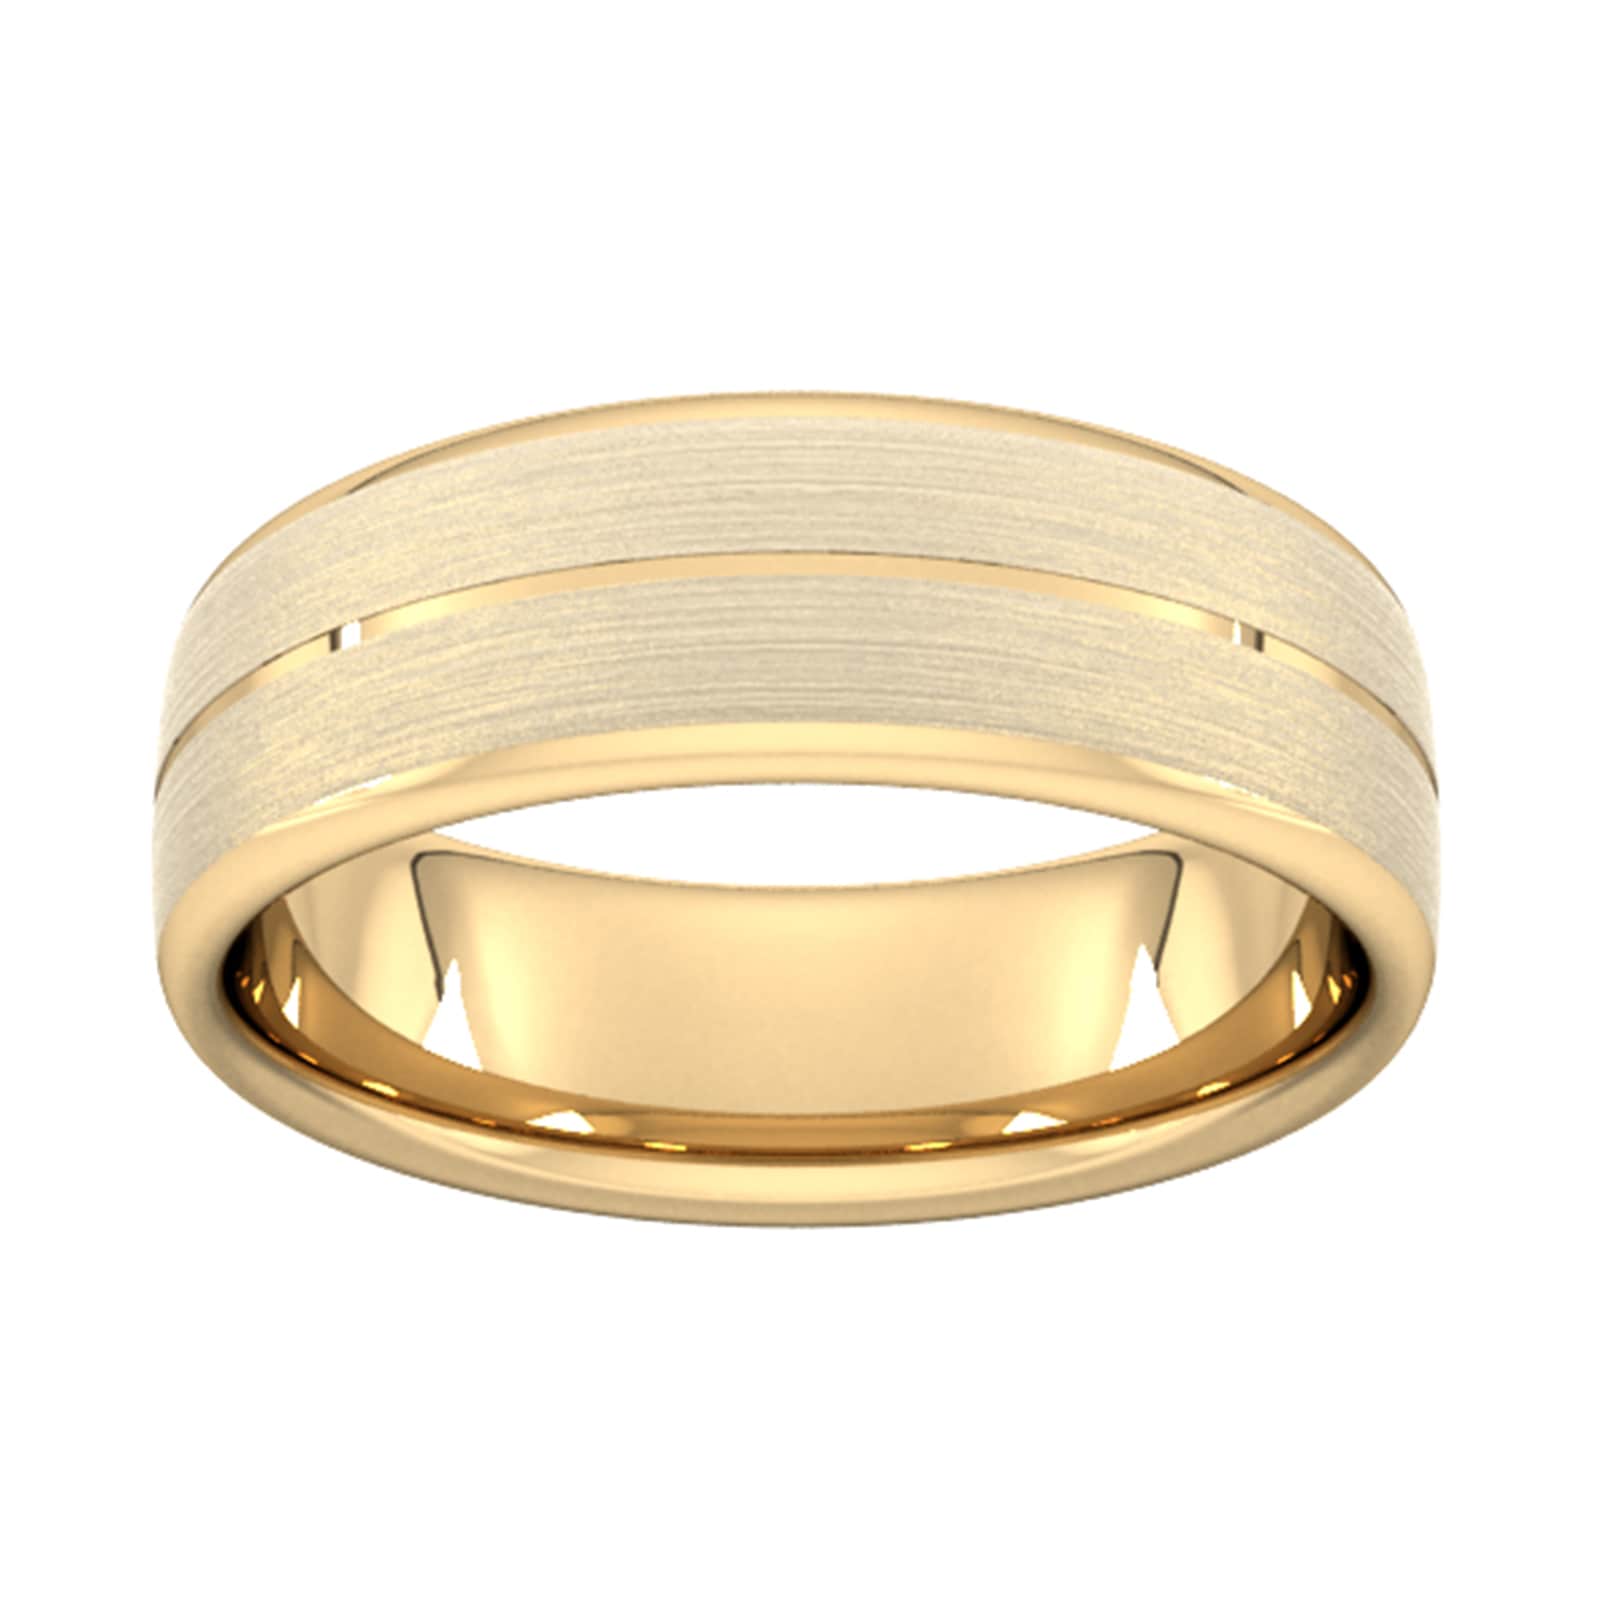 7mm Traditional Court Heavy Centre Groove With Chamfered Edge Wedding Ring In 9 Carat Yellow Gold - Ring Size I